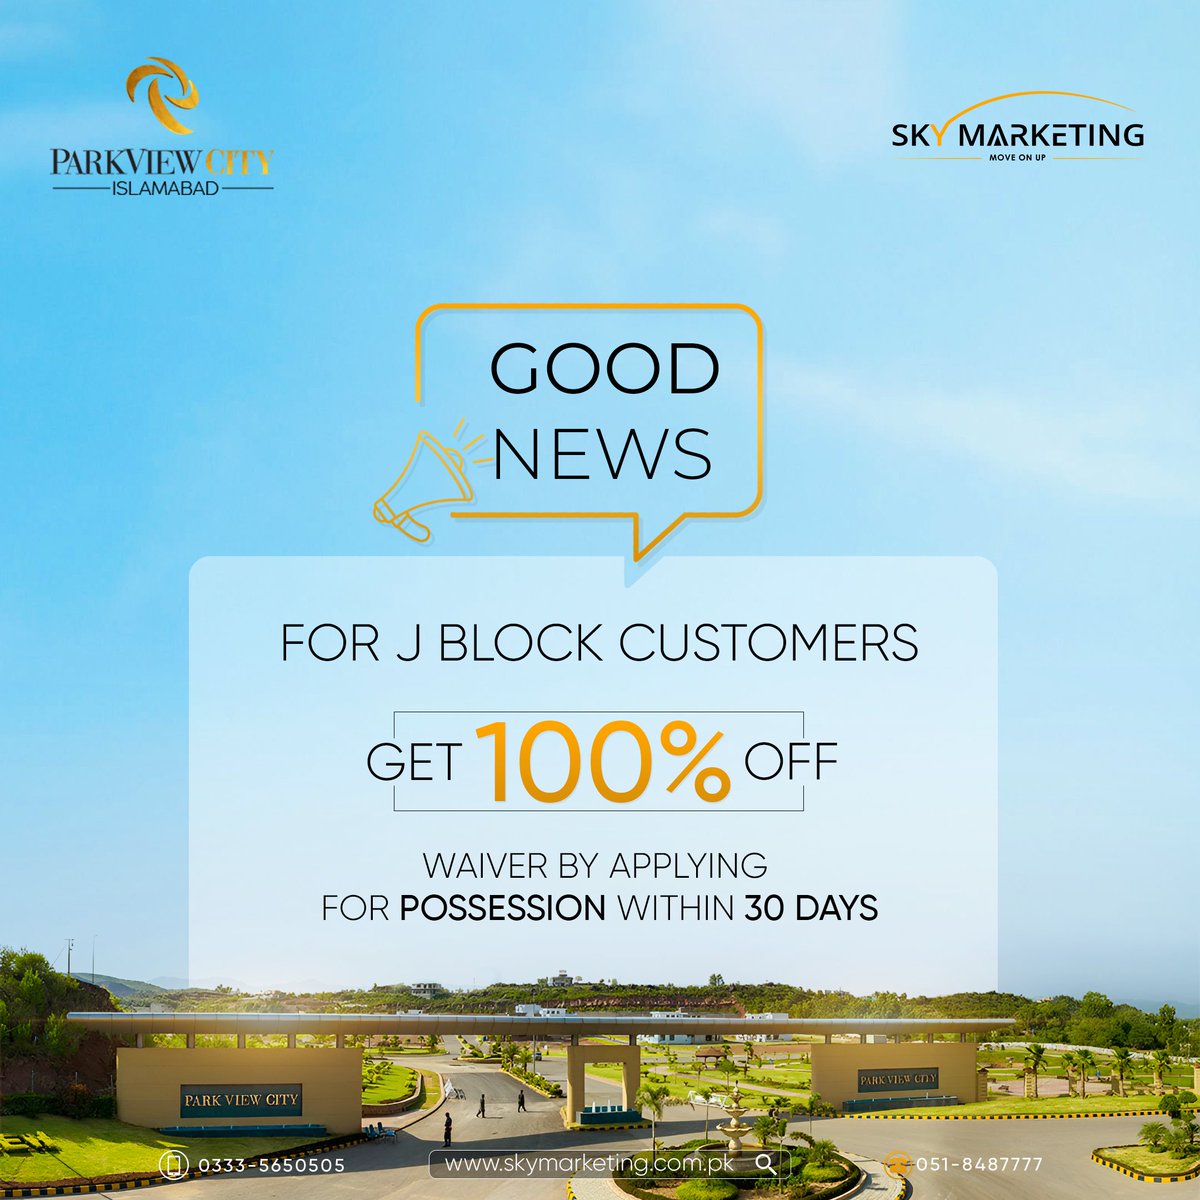 During the J block allotment ceremony, Chairman Vision Group, Mr. Aleem Khan announced a 100% off waiver for J block customers who apply for possession within 30 days.
#SkyMarketing #1RealEstateMarketingCompany #ParkViewCity #AllotmentCeremony #announcement #AleemKhan